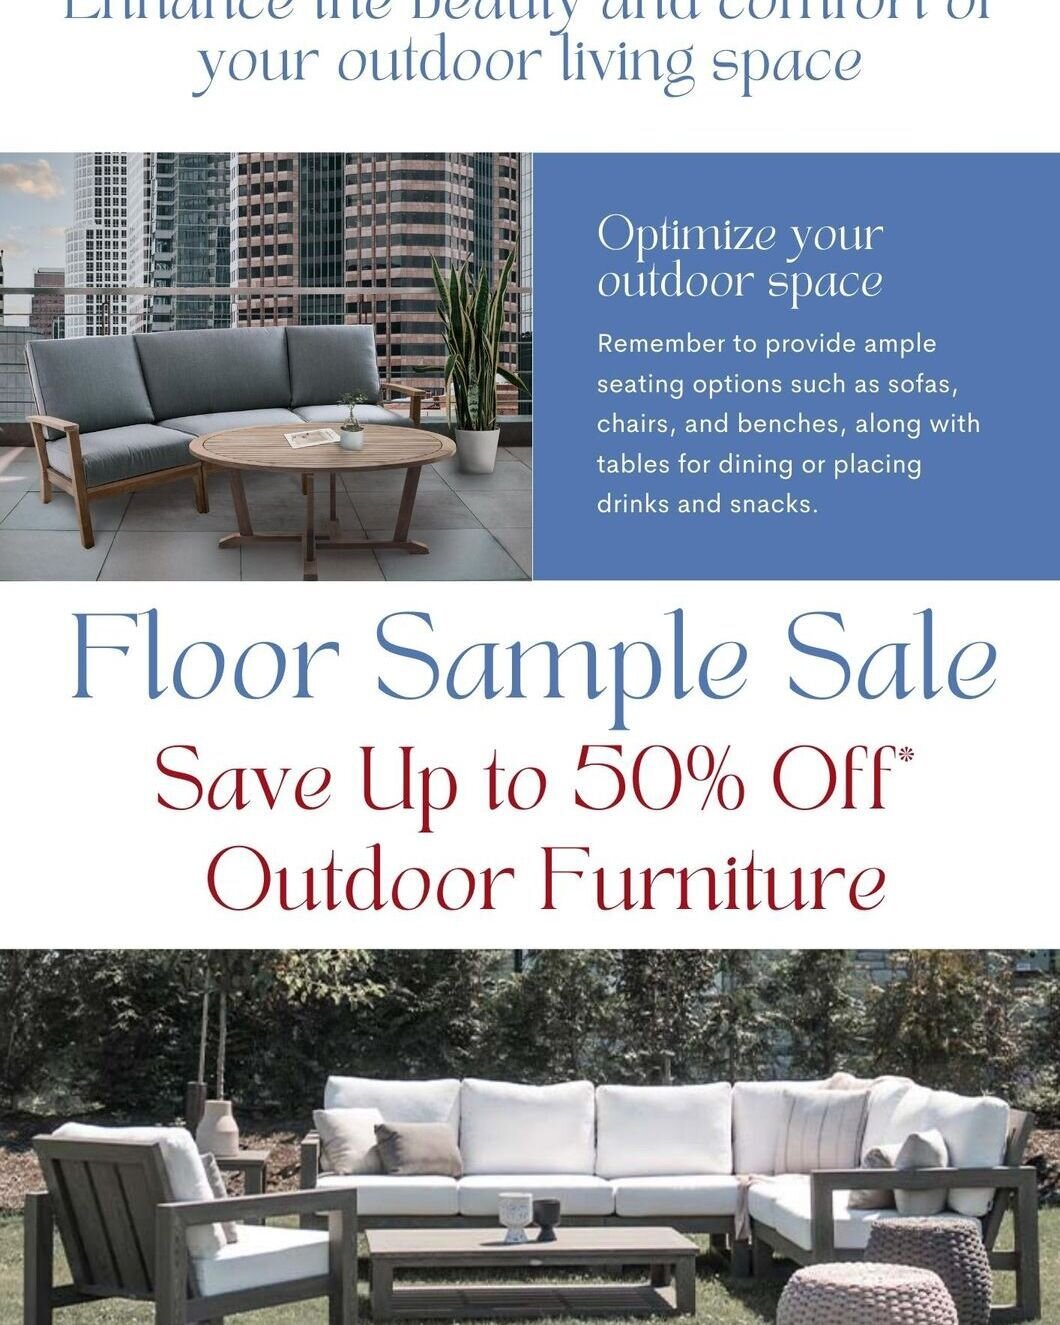 Floor Sample Sale - Save up to 50% off* Outdoor Furniture. Ready for immediate delivery.